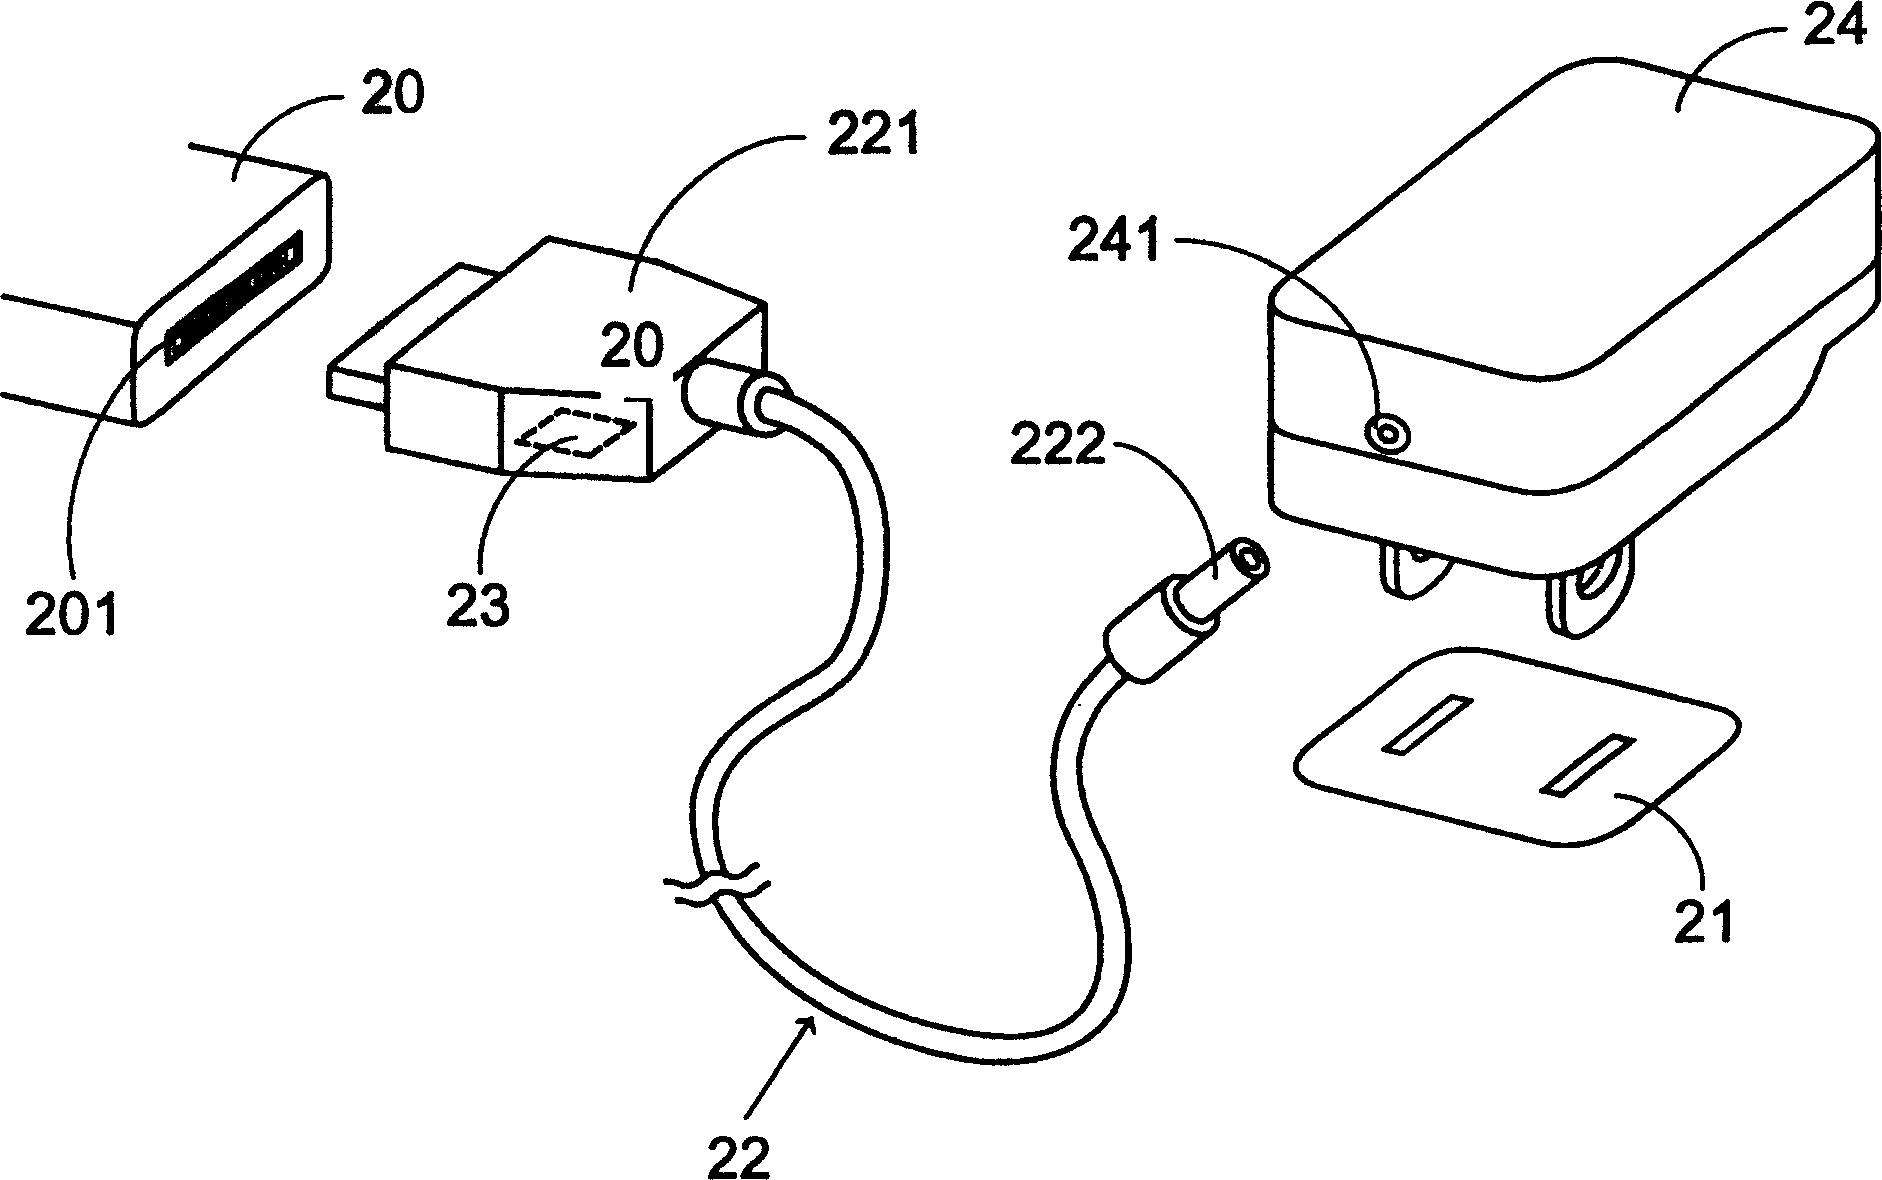 Power supply adapter for portable electronic device